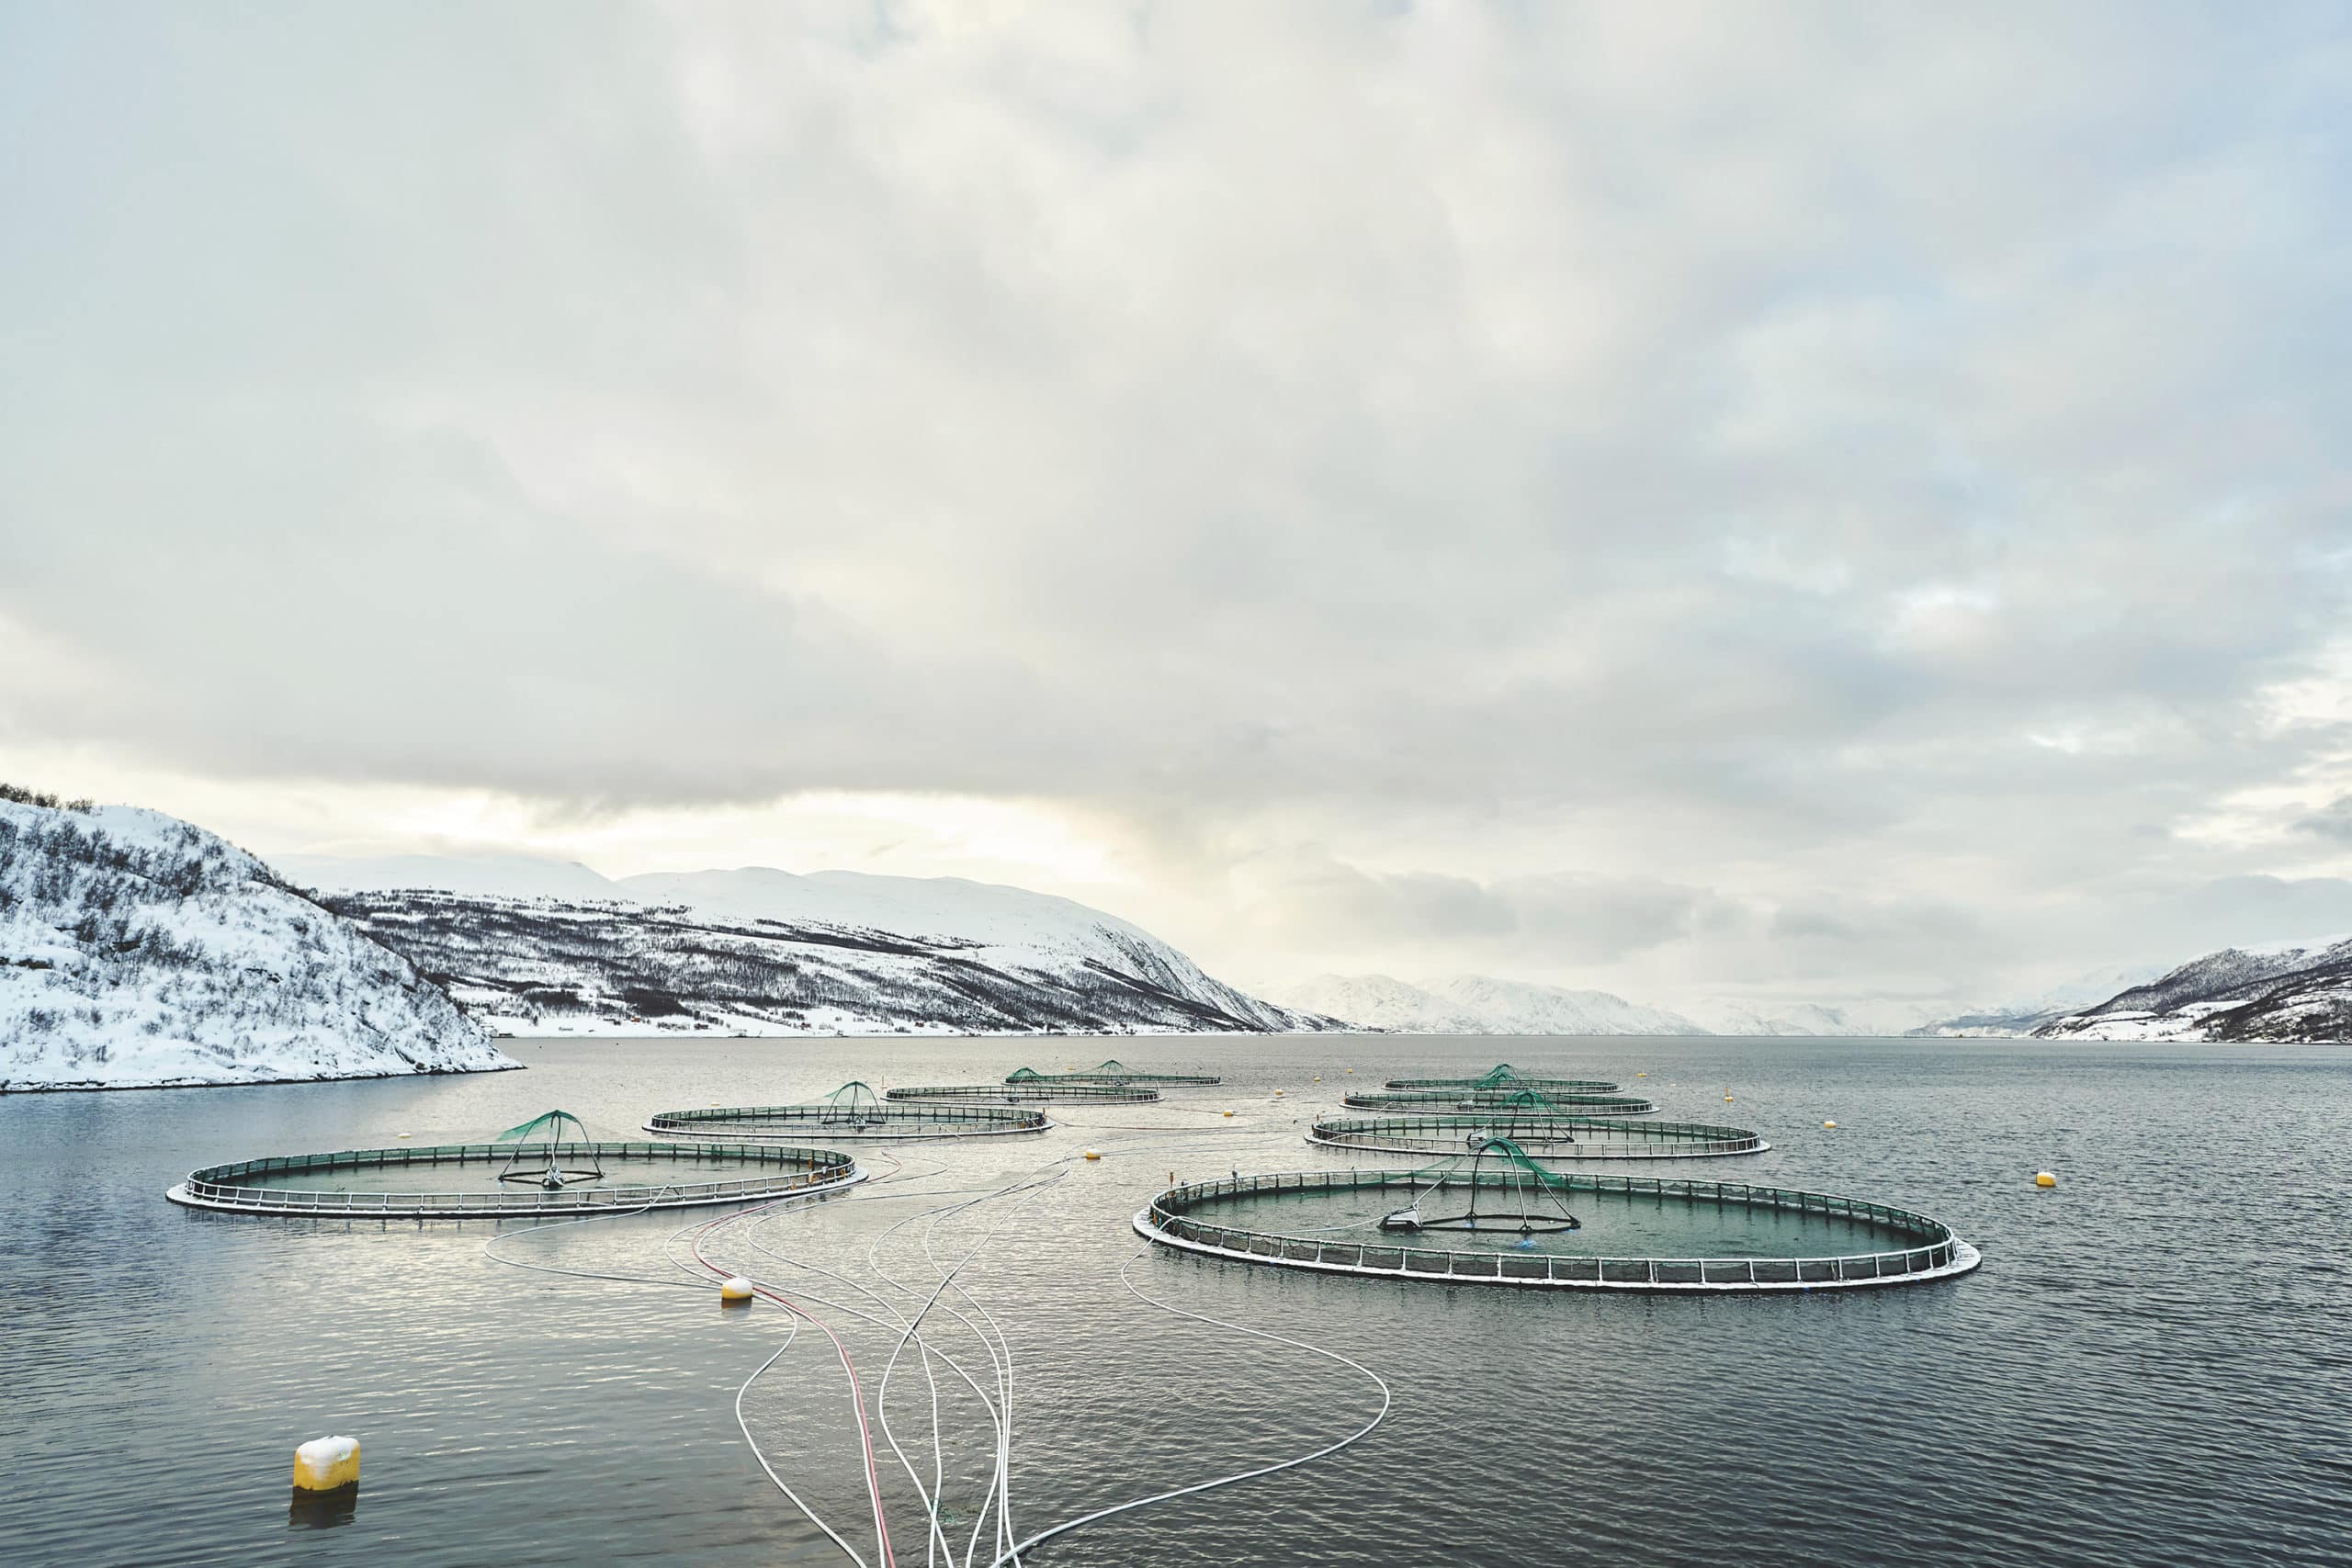 Grieg Seafood delivers innovation in sustainable feed for their fish farming cages.